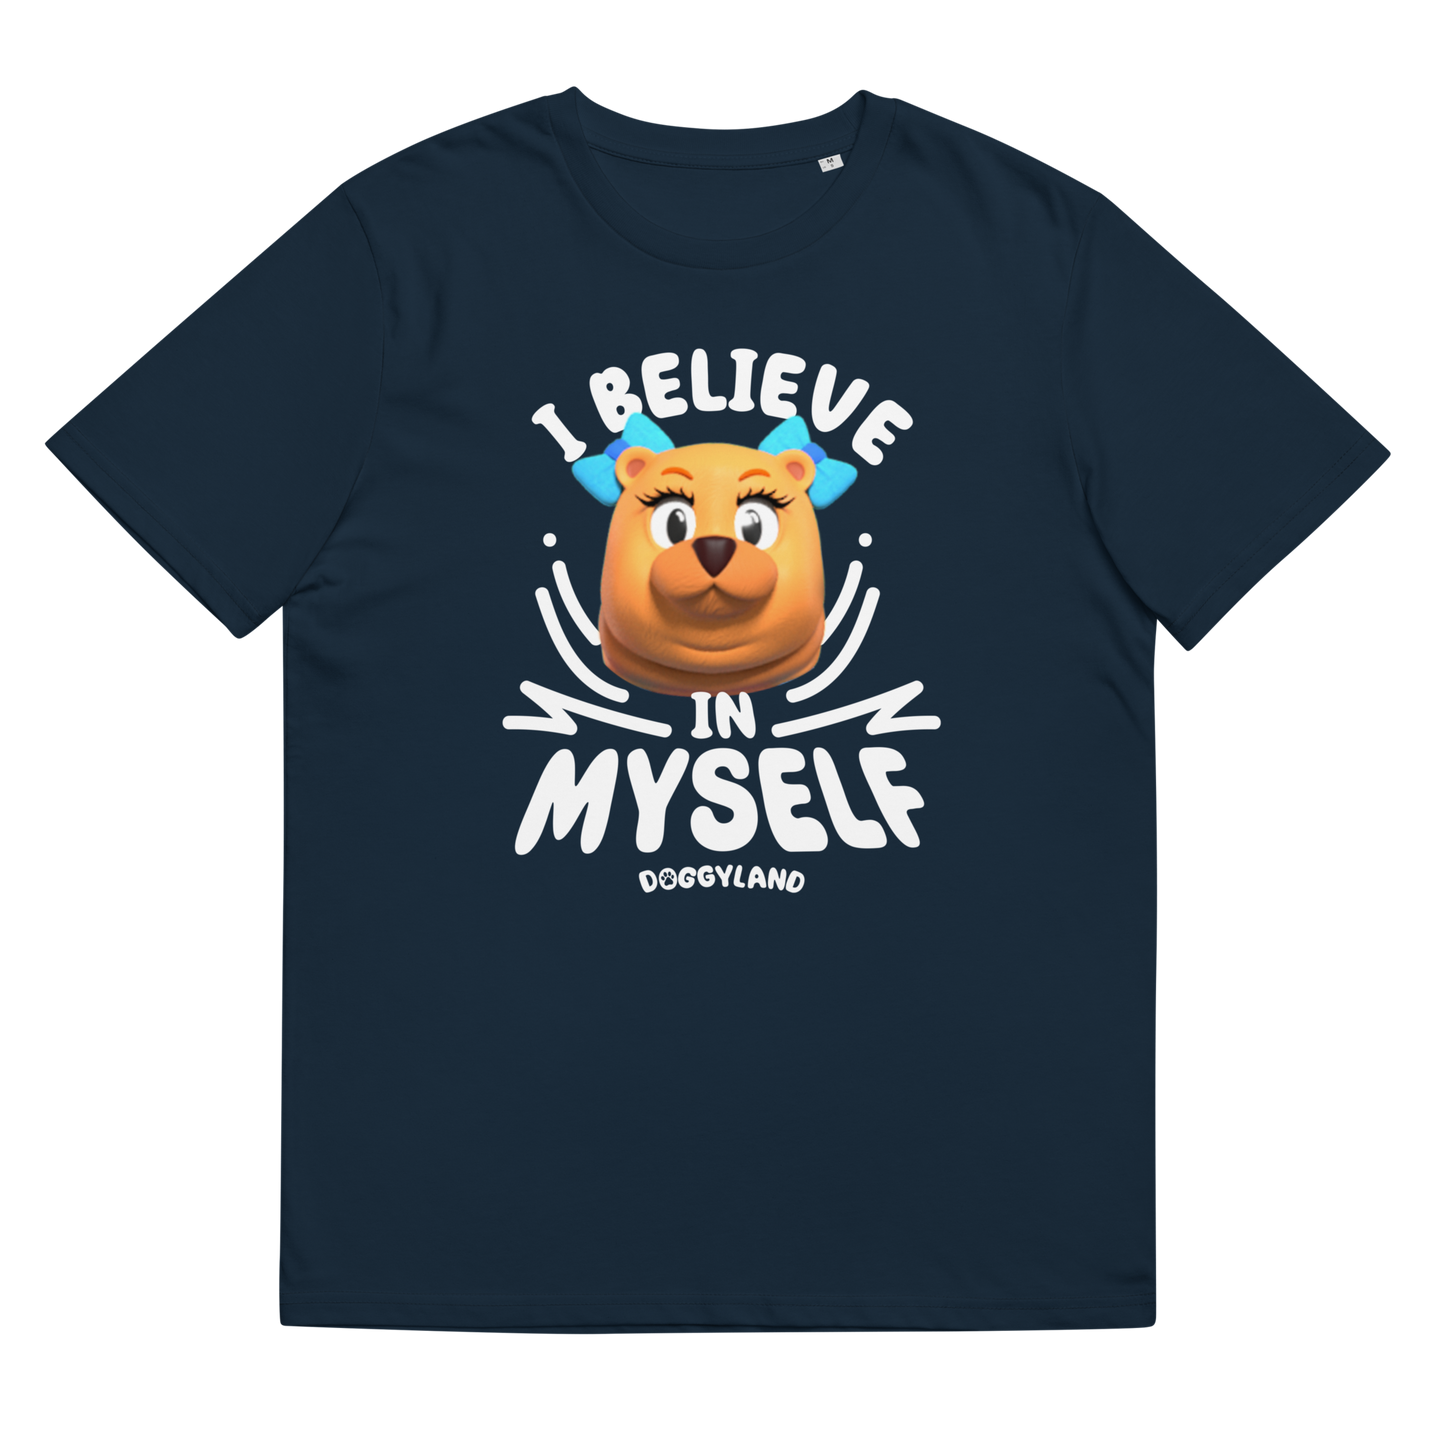 Adult Chow Wow "I Believe In Myself" Affirmation Shirt